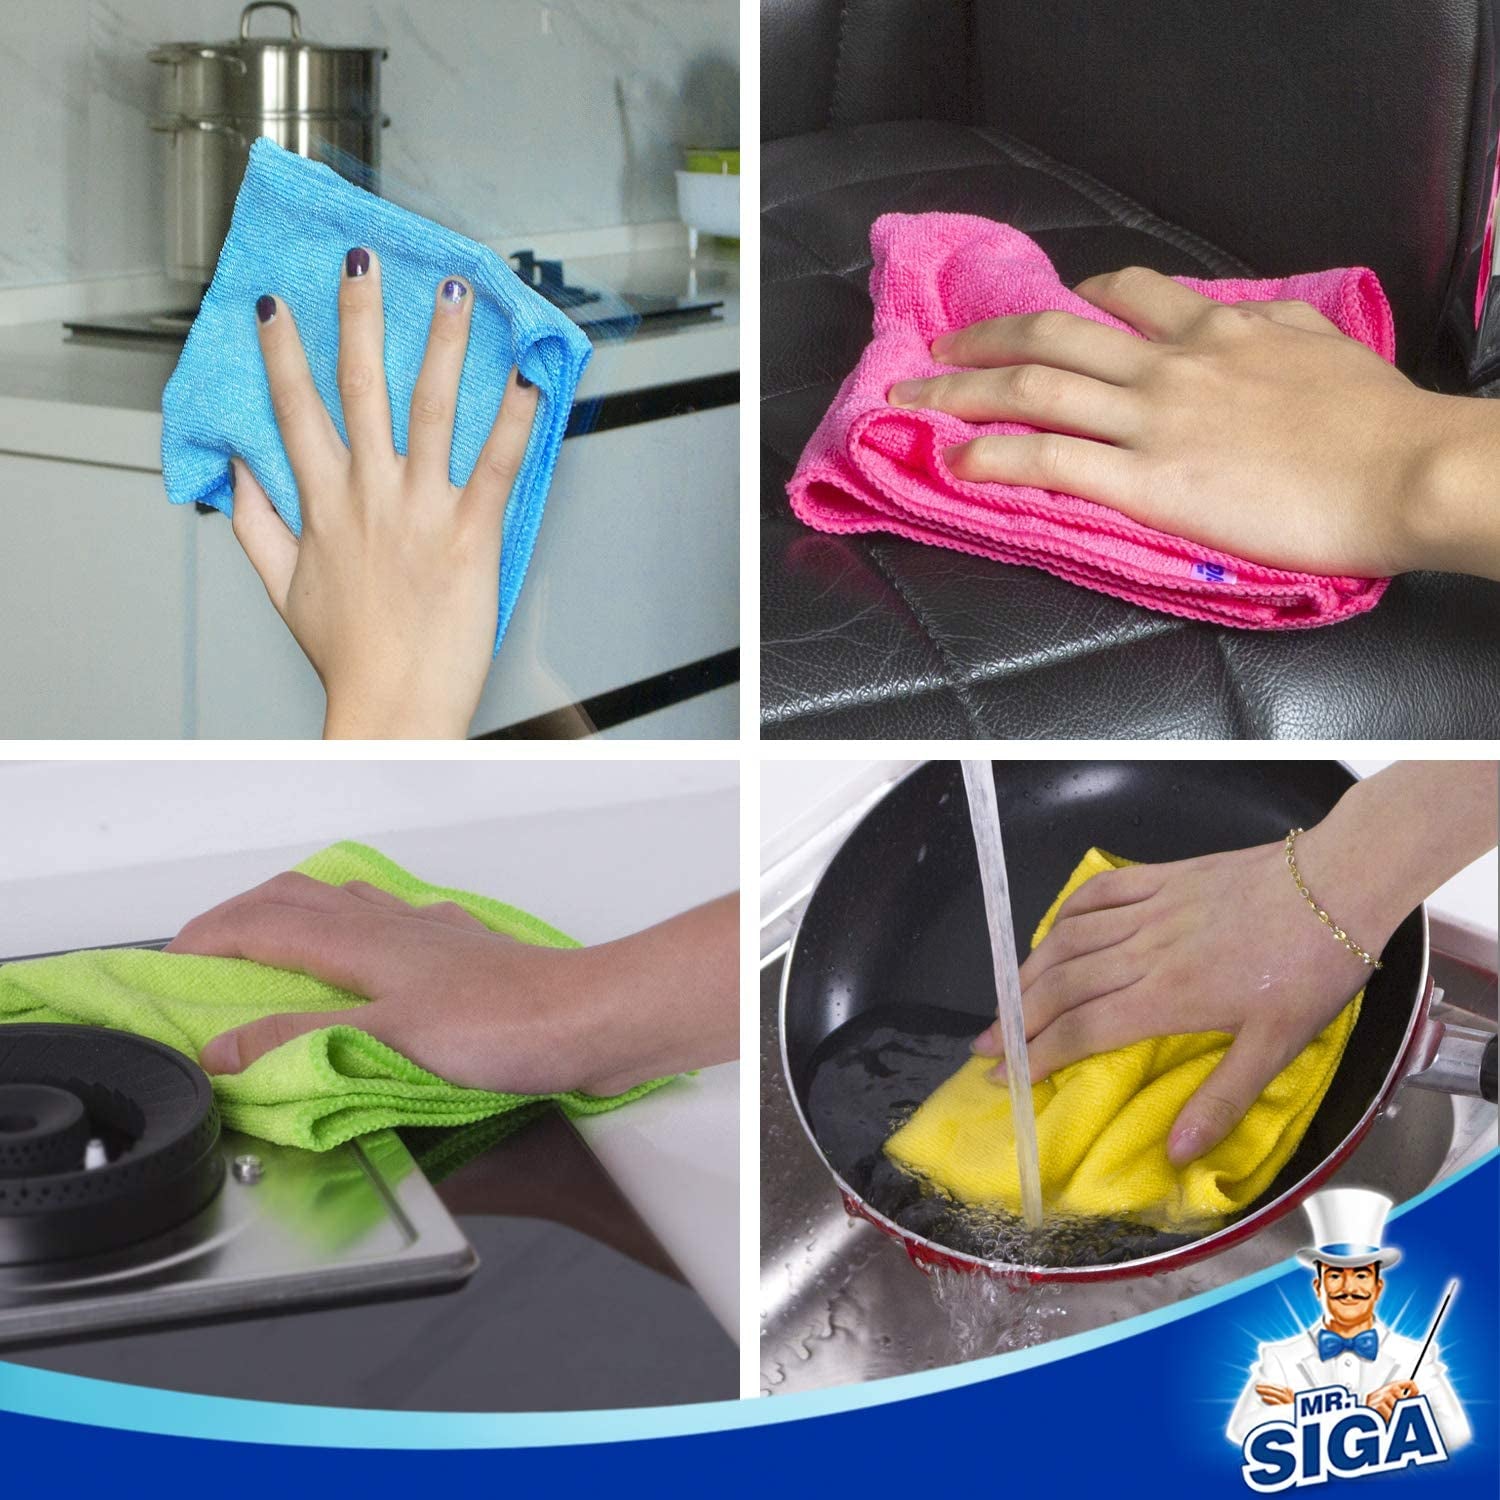 A selection of household items proposed by Mr. Siga